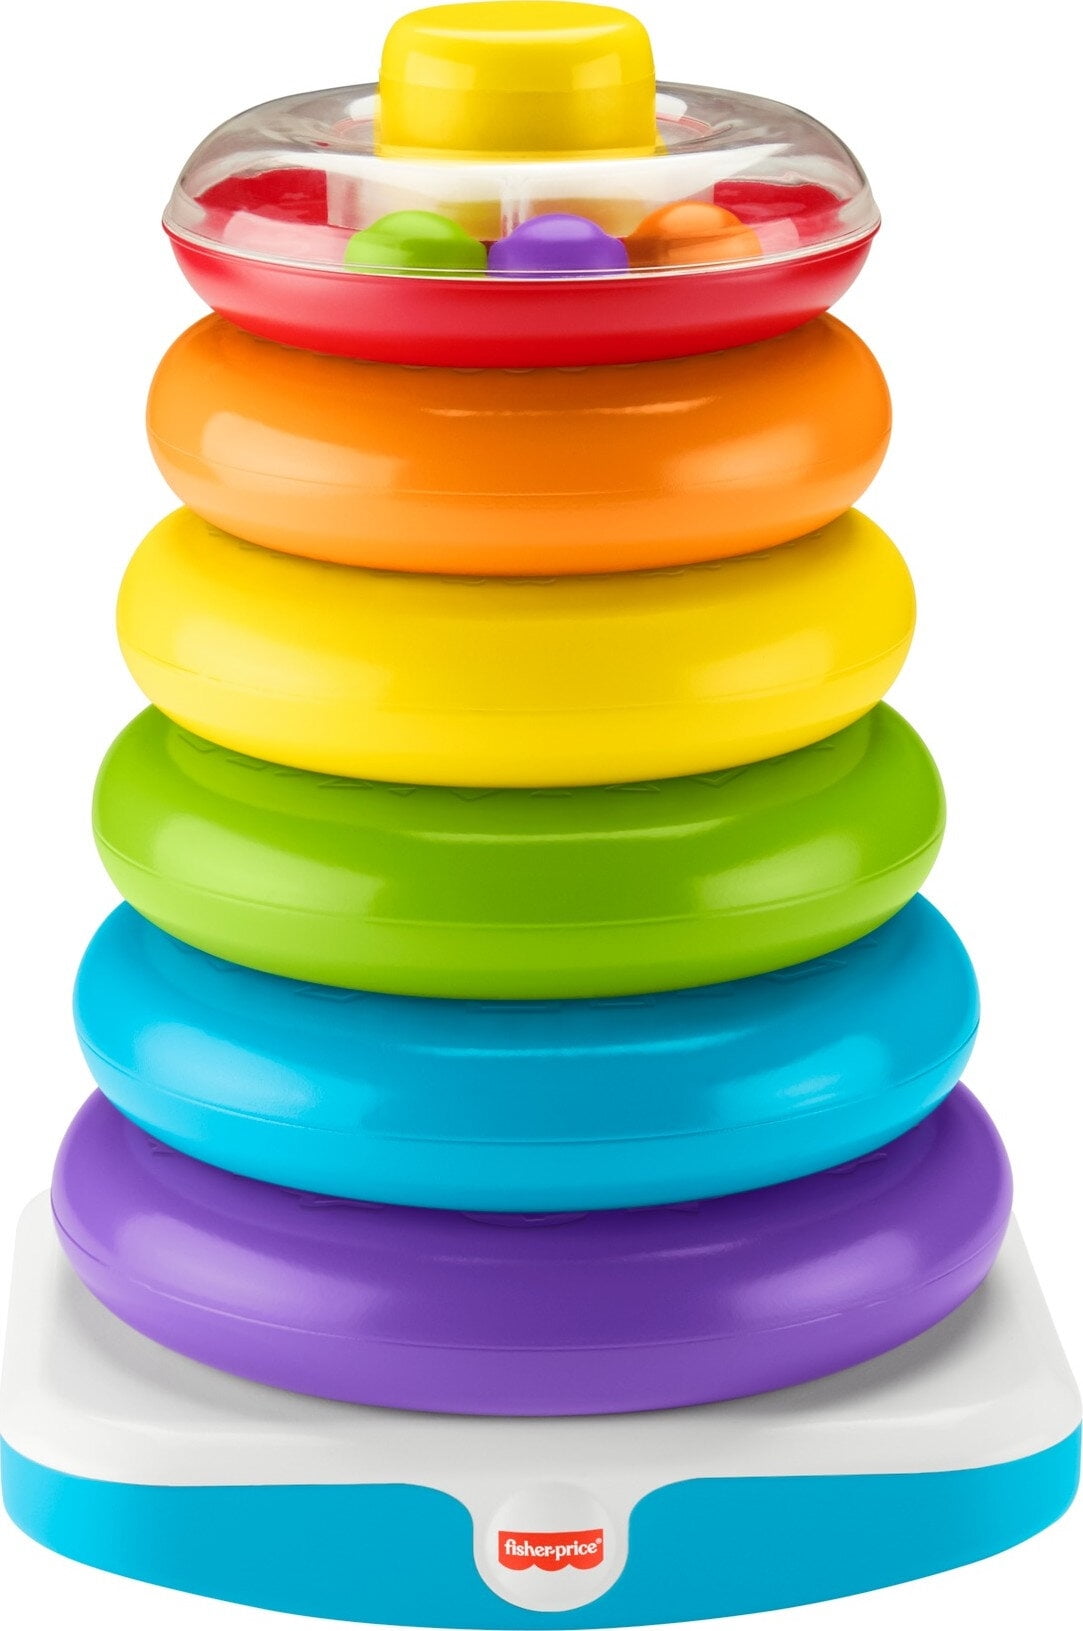 Fisher-Price Giant Rock-A-Stack Baby Toy, Ring Stacking Toy For Infants And Toddlers, 14+ Inches Tall